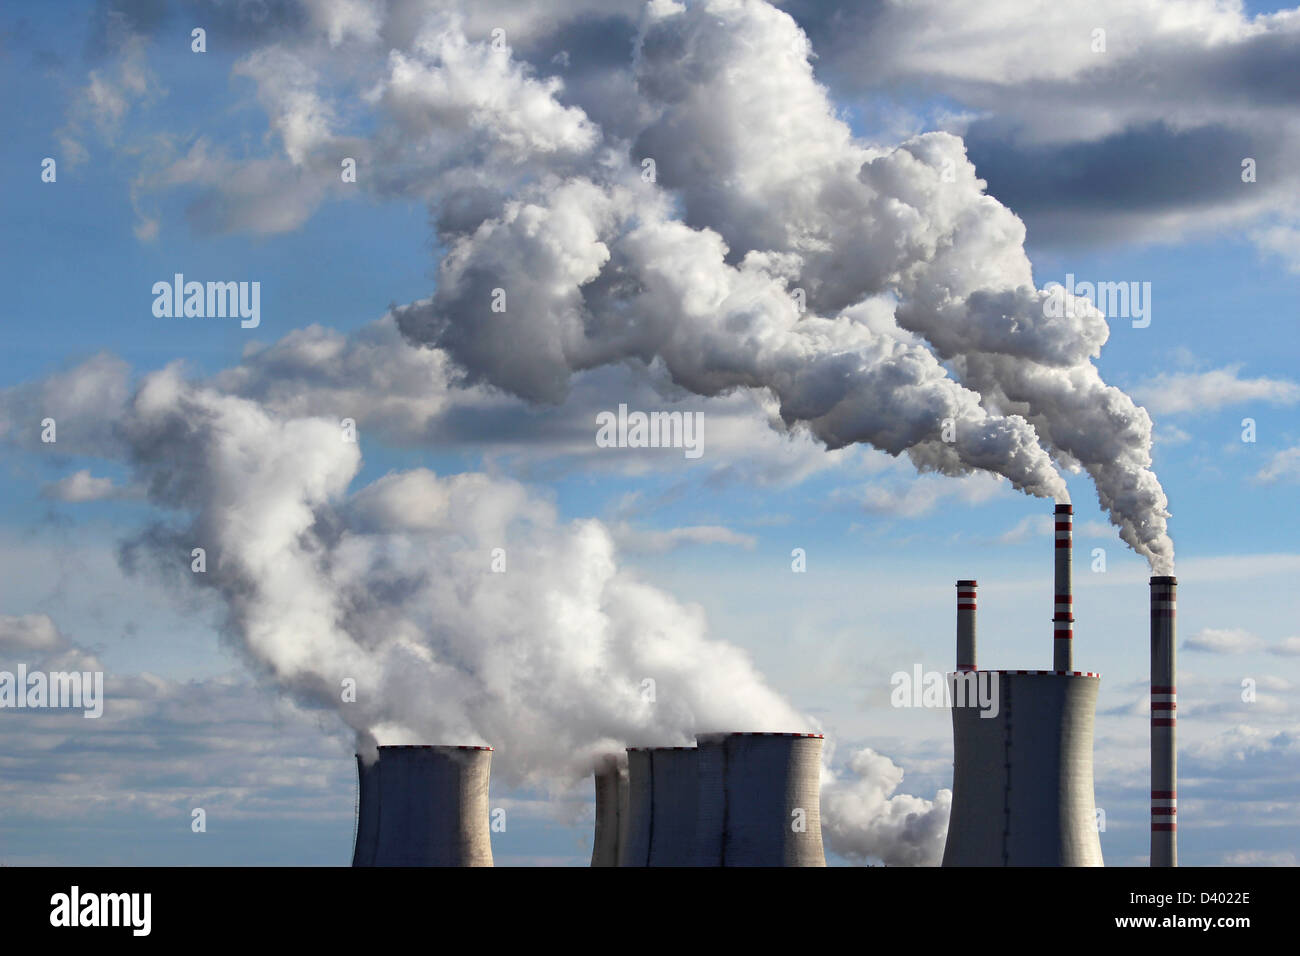 smoking cooling towers of coal power plant Stock Photo